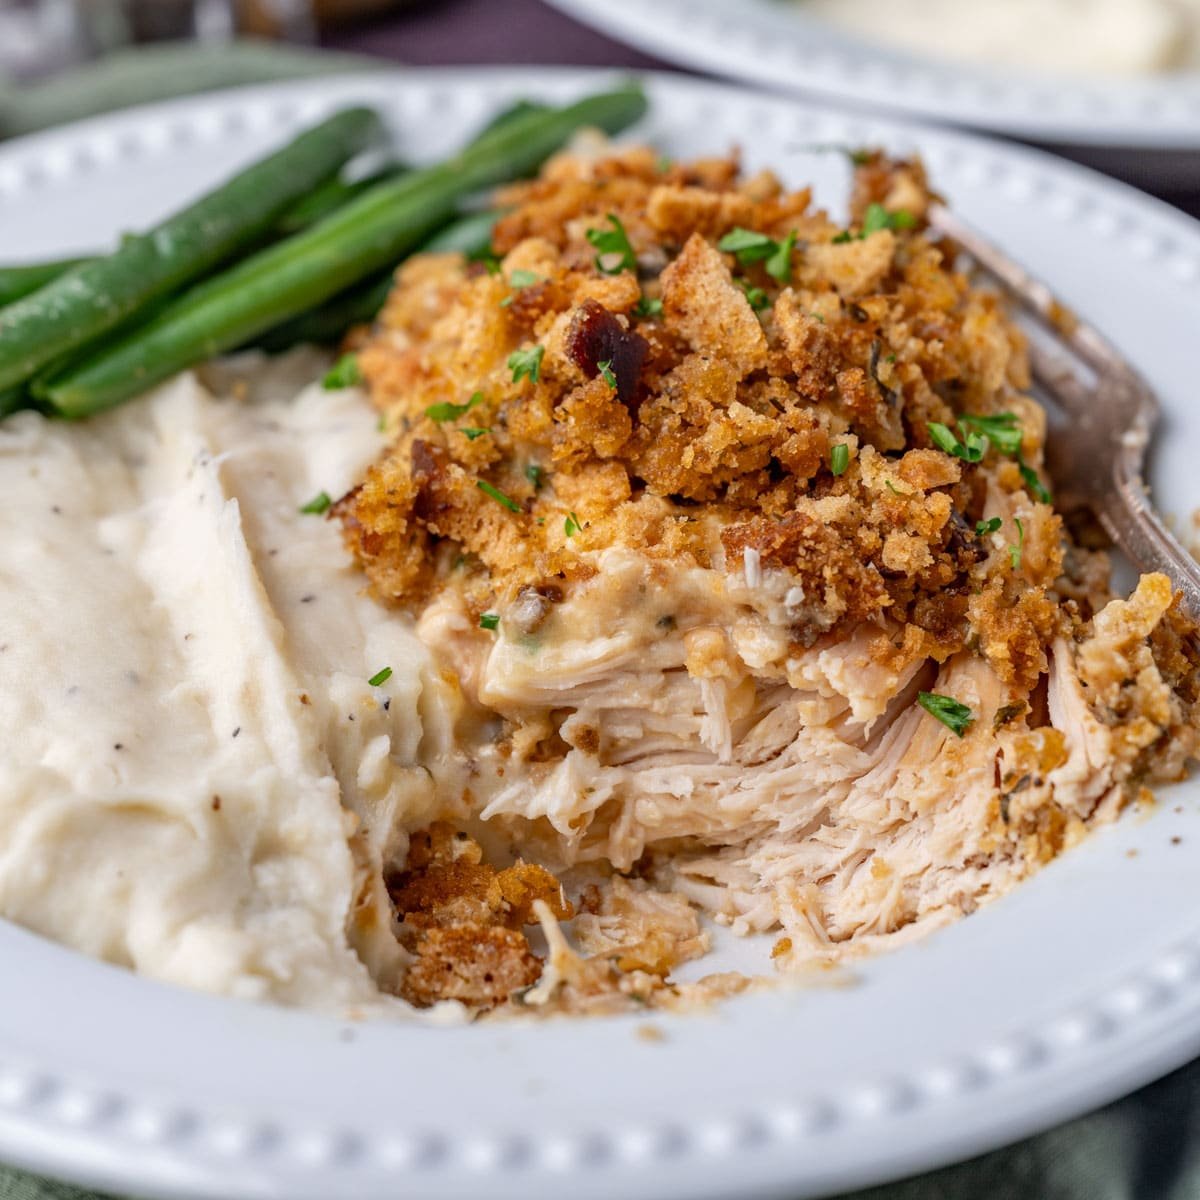 a plate of chicken and stuffing with mashed potatoes and green beans